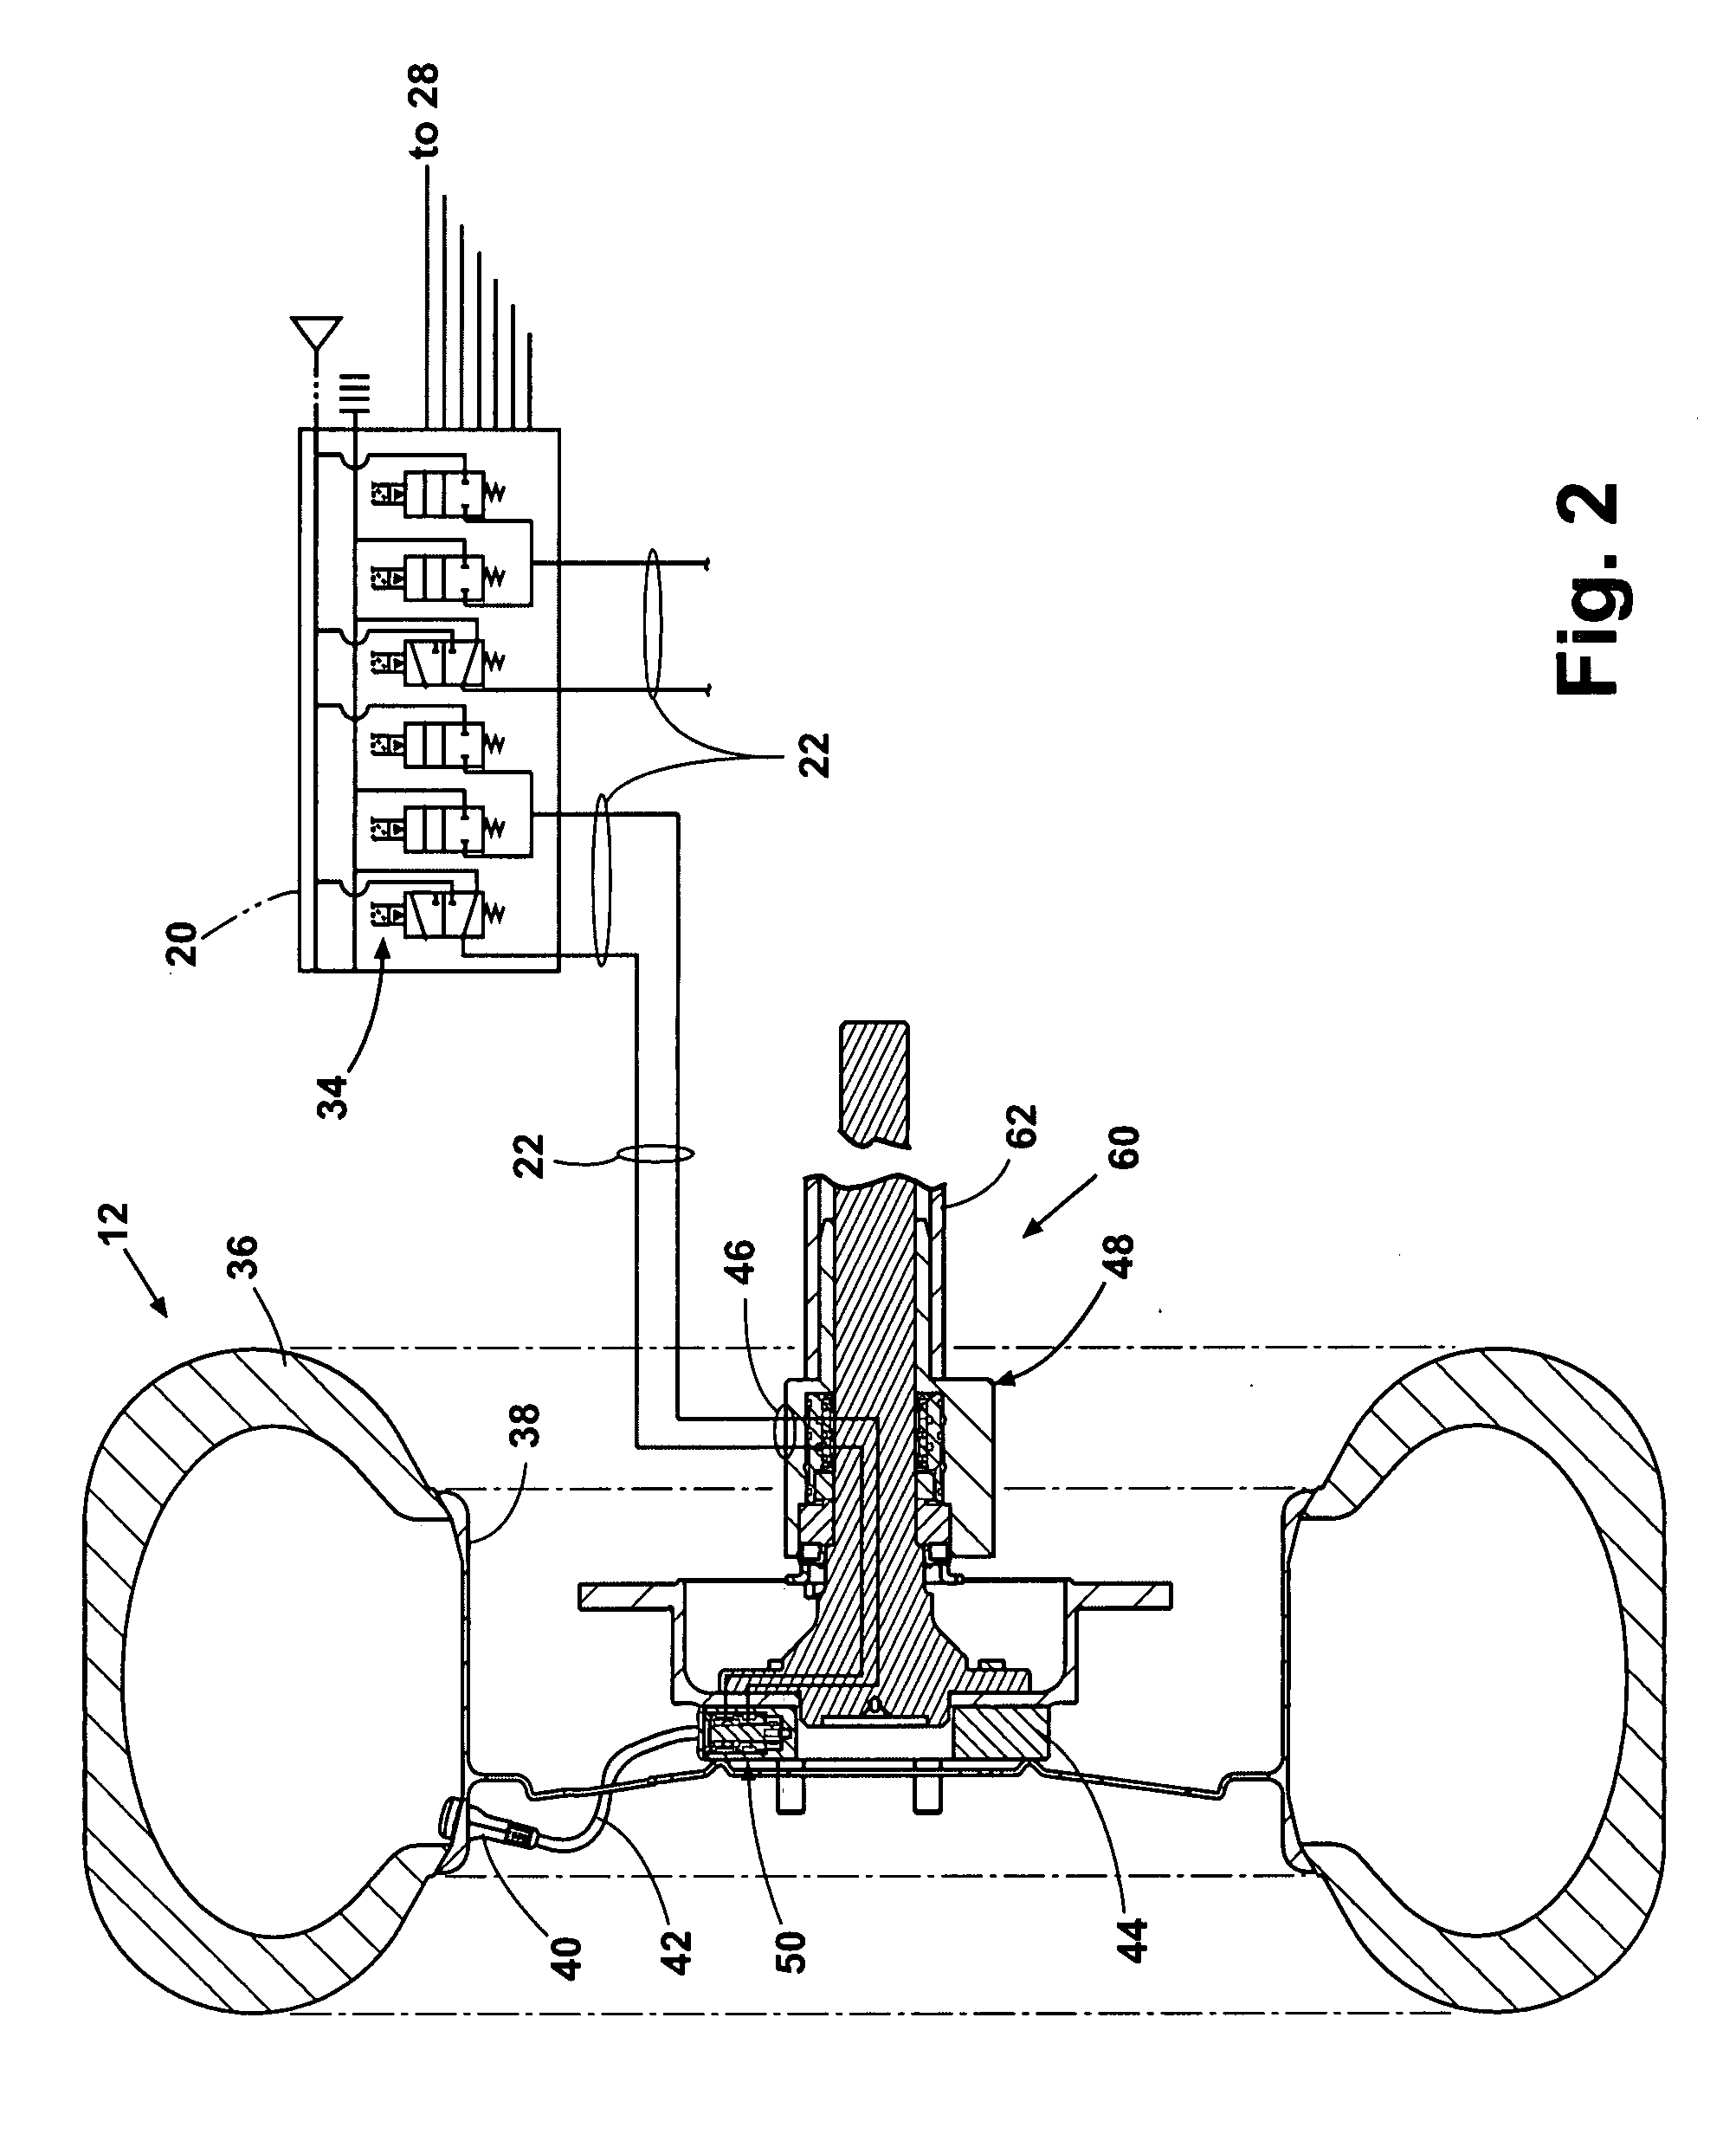 Tire inflation control method and apparatus